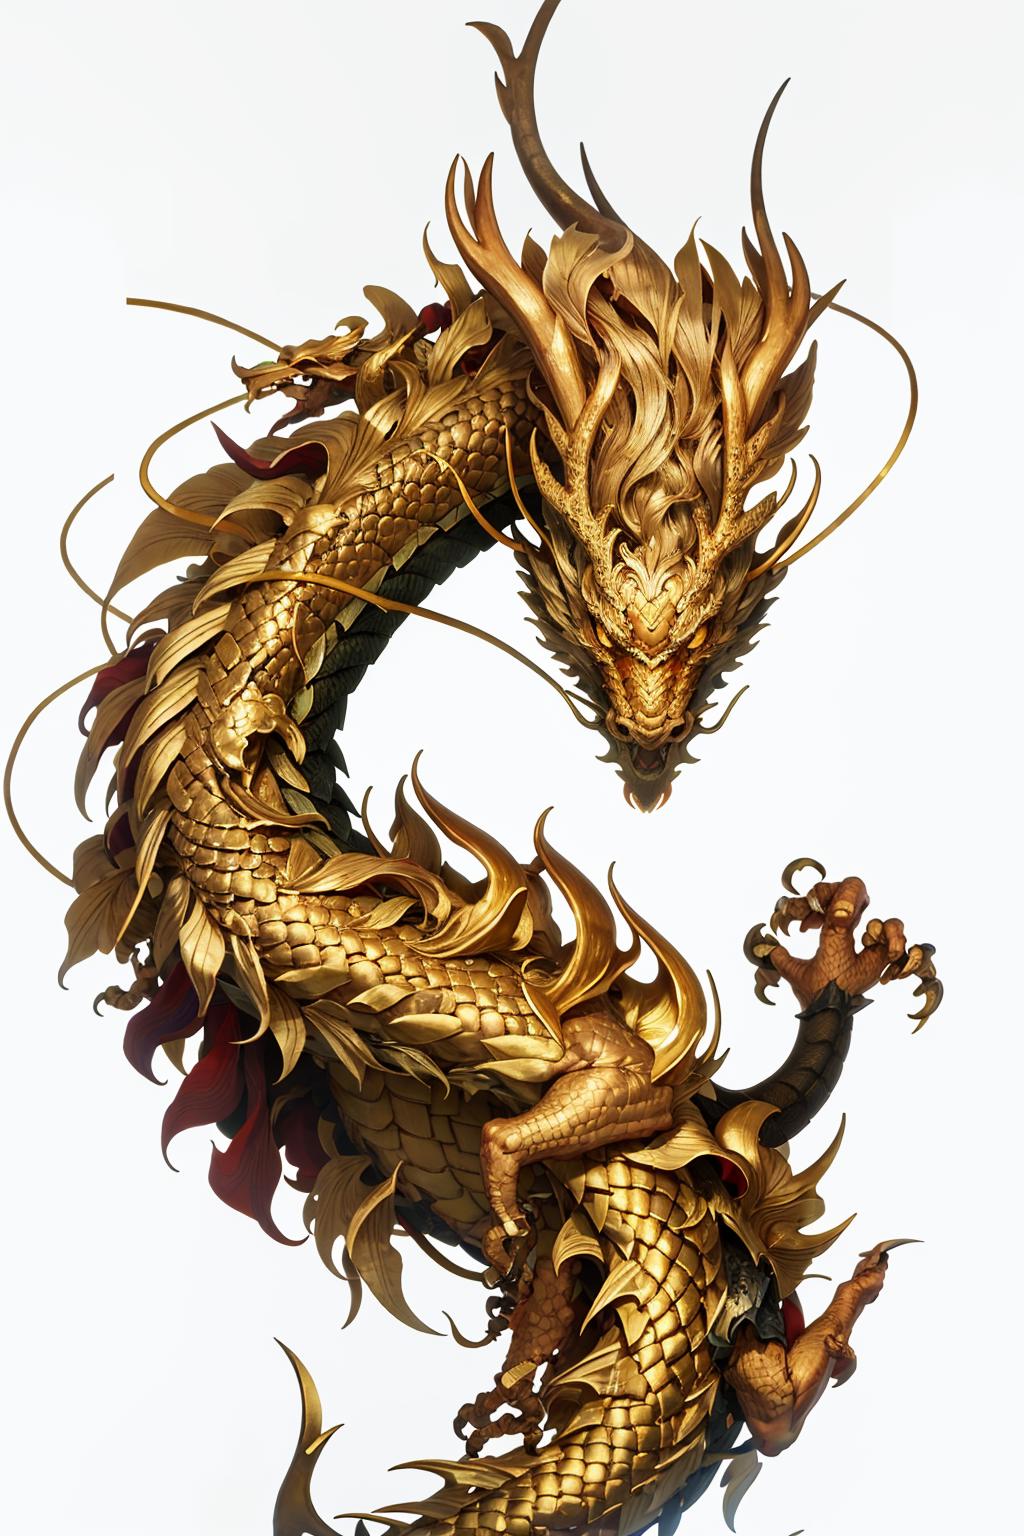 concept Loong(china dragon\eastern dragon)中国龙 image by Everynyan